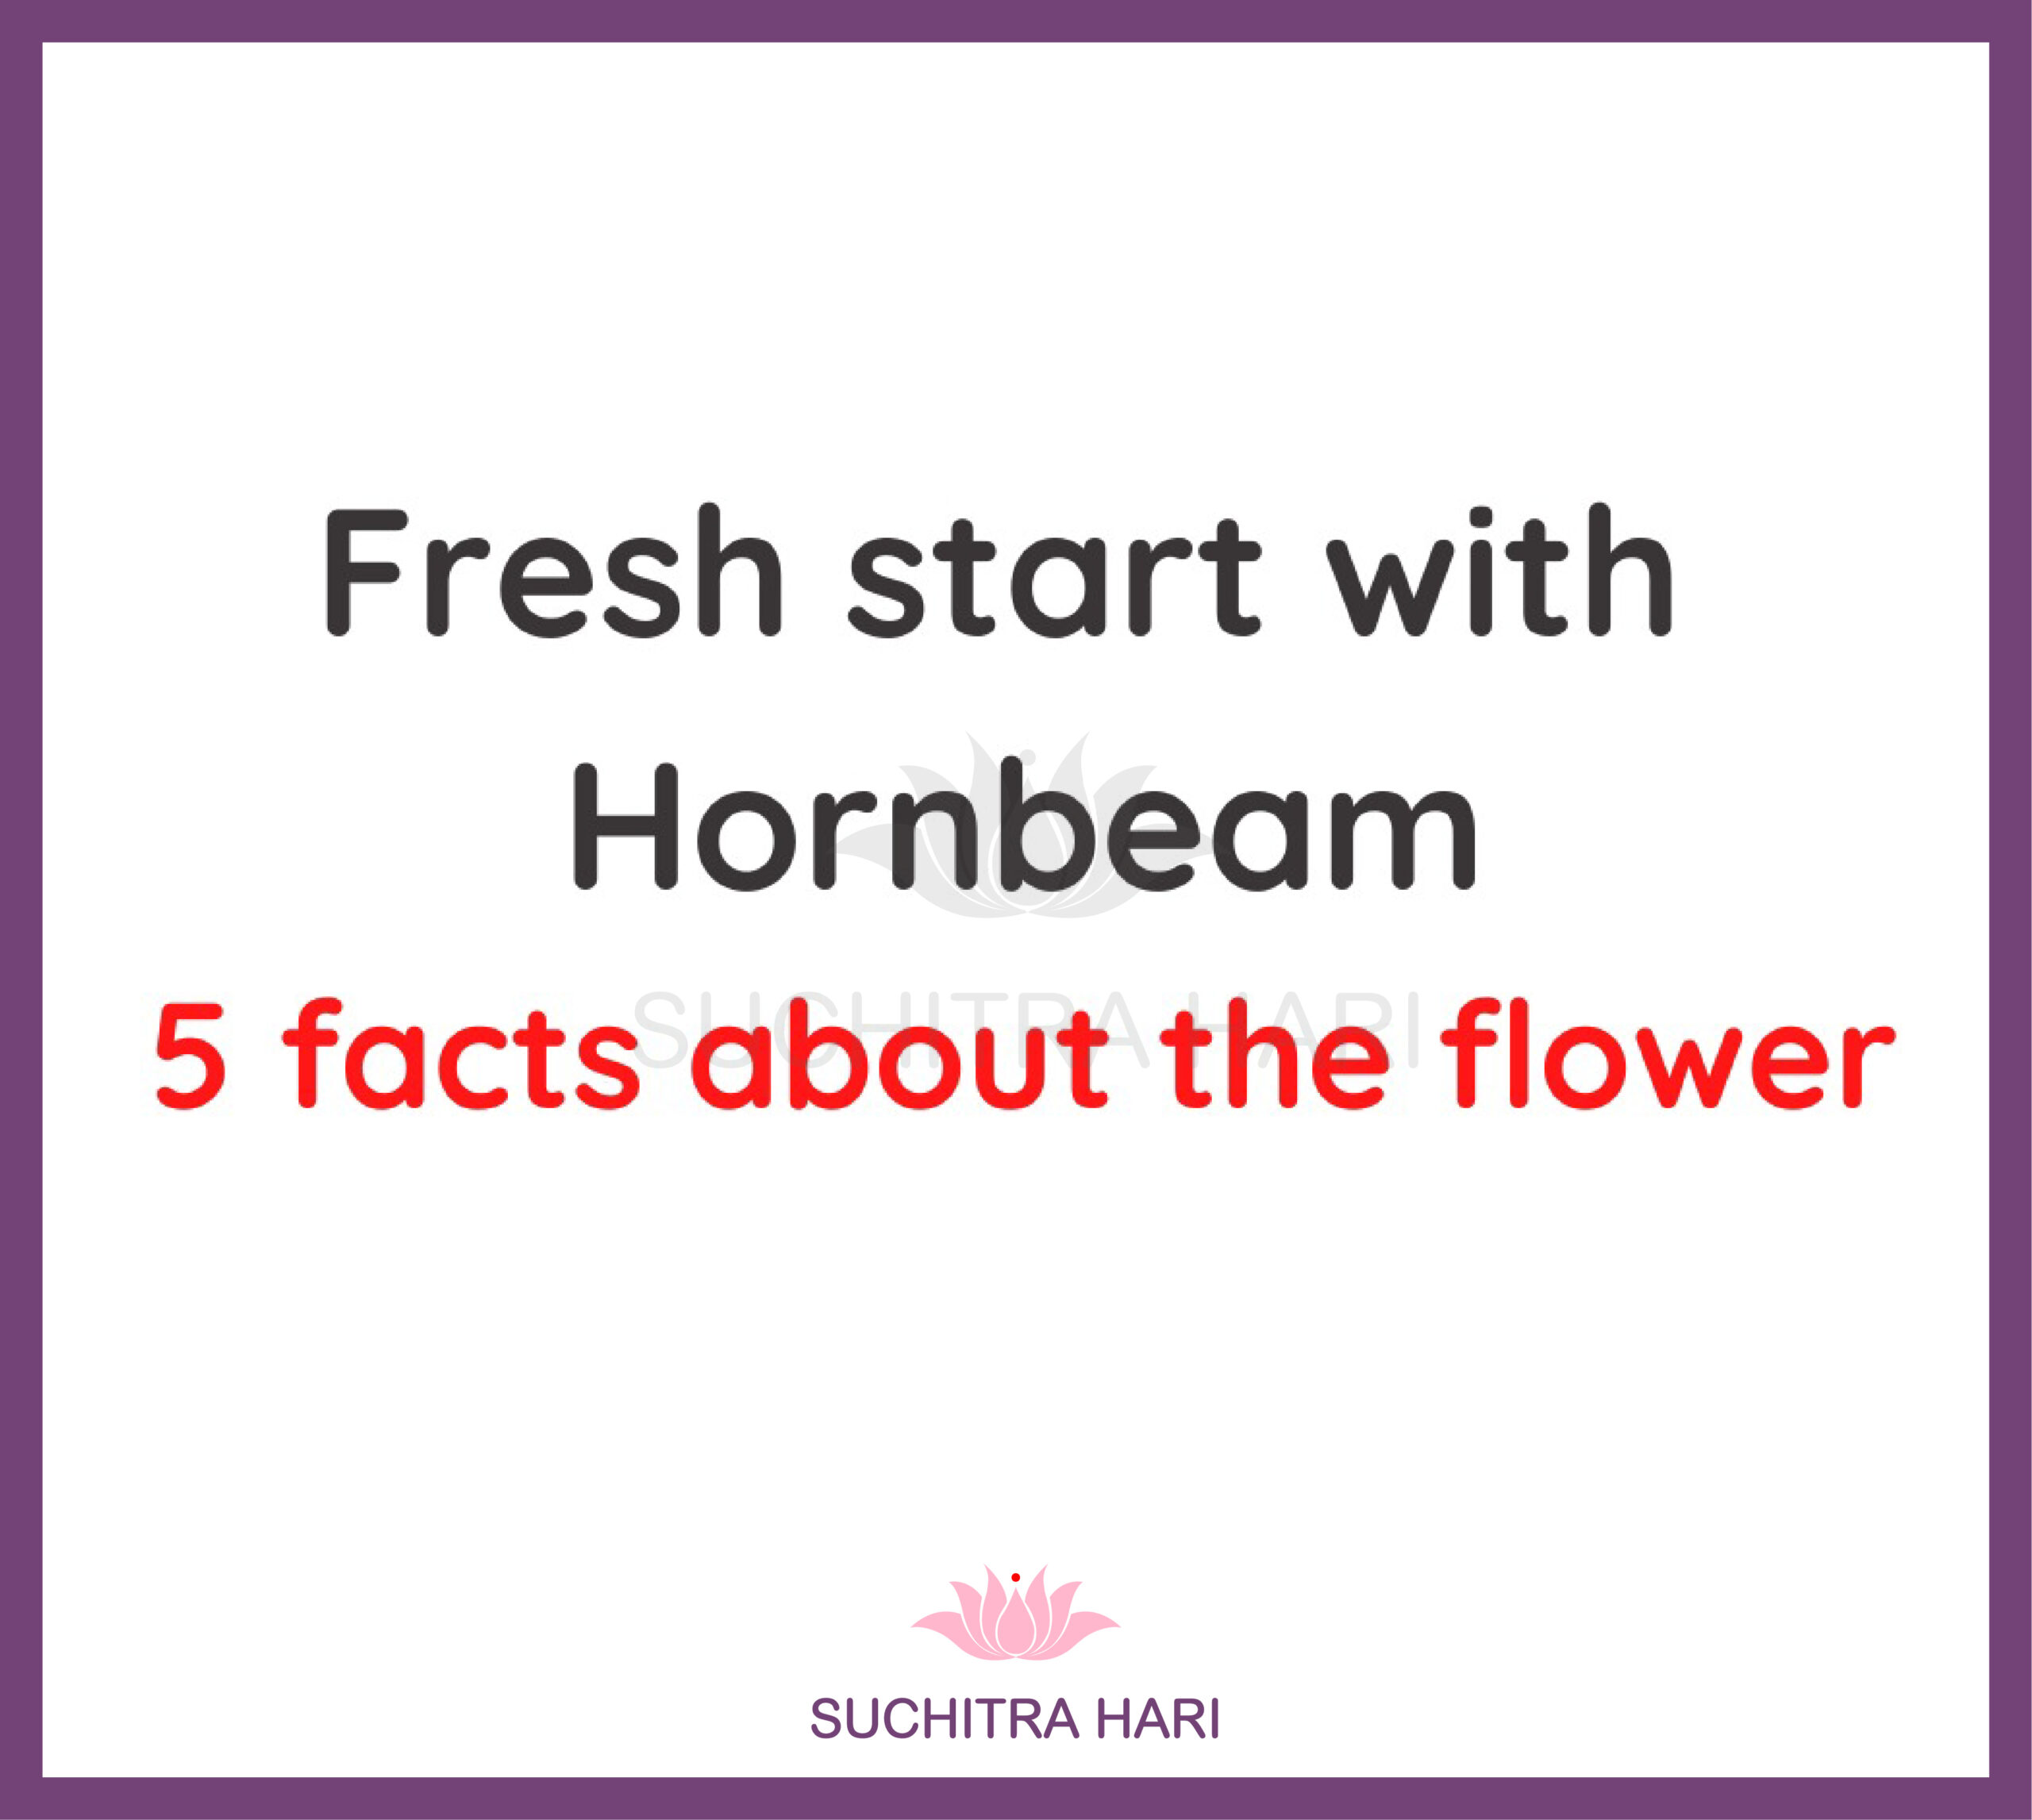 Fresh start with Hornbeam: 5 facts about this flower